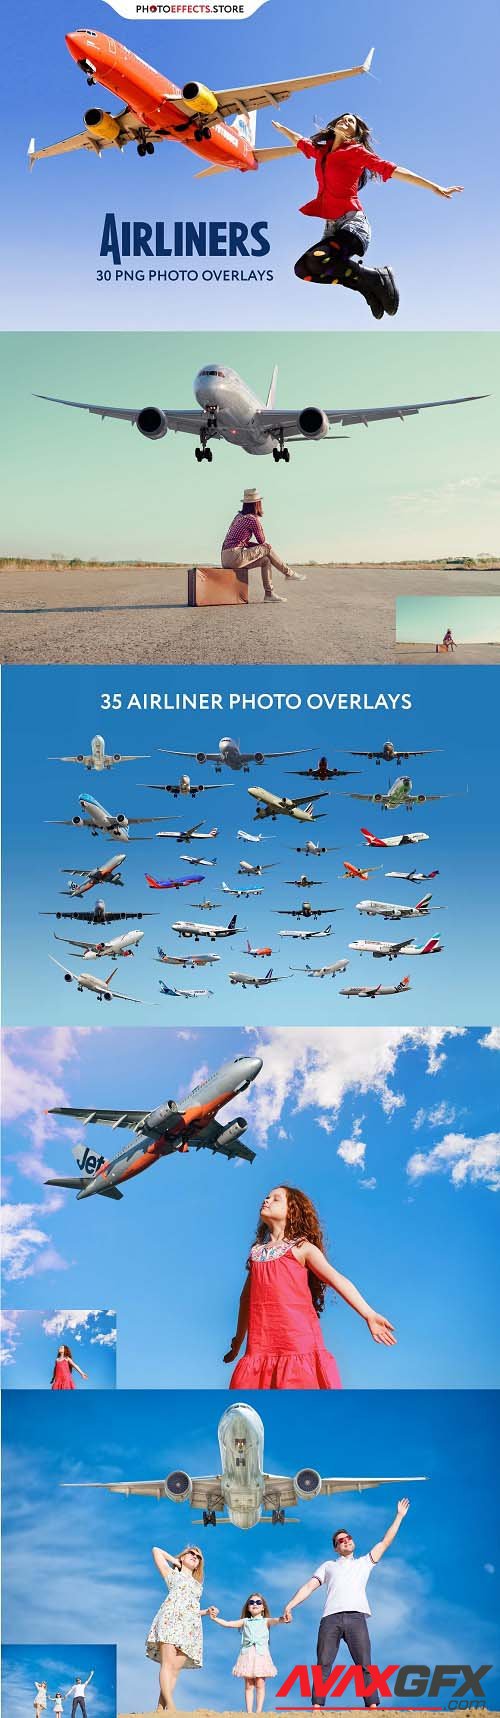 35 Airliners Photo Overlays - 6576238